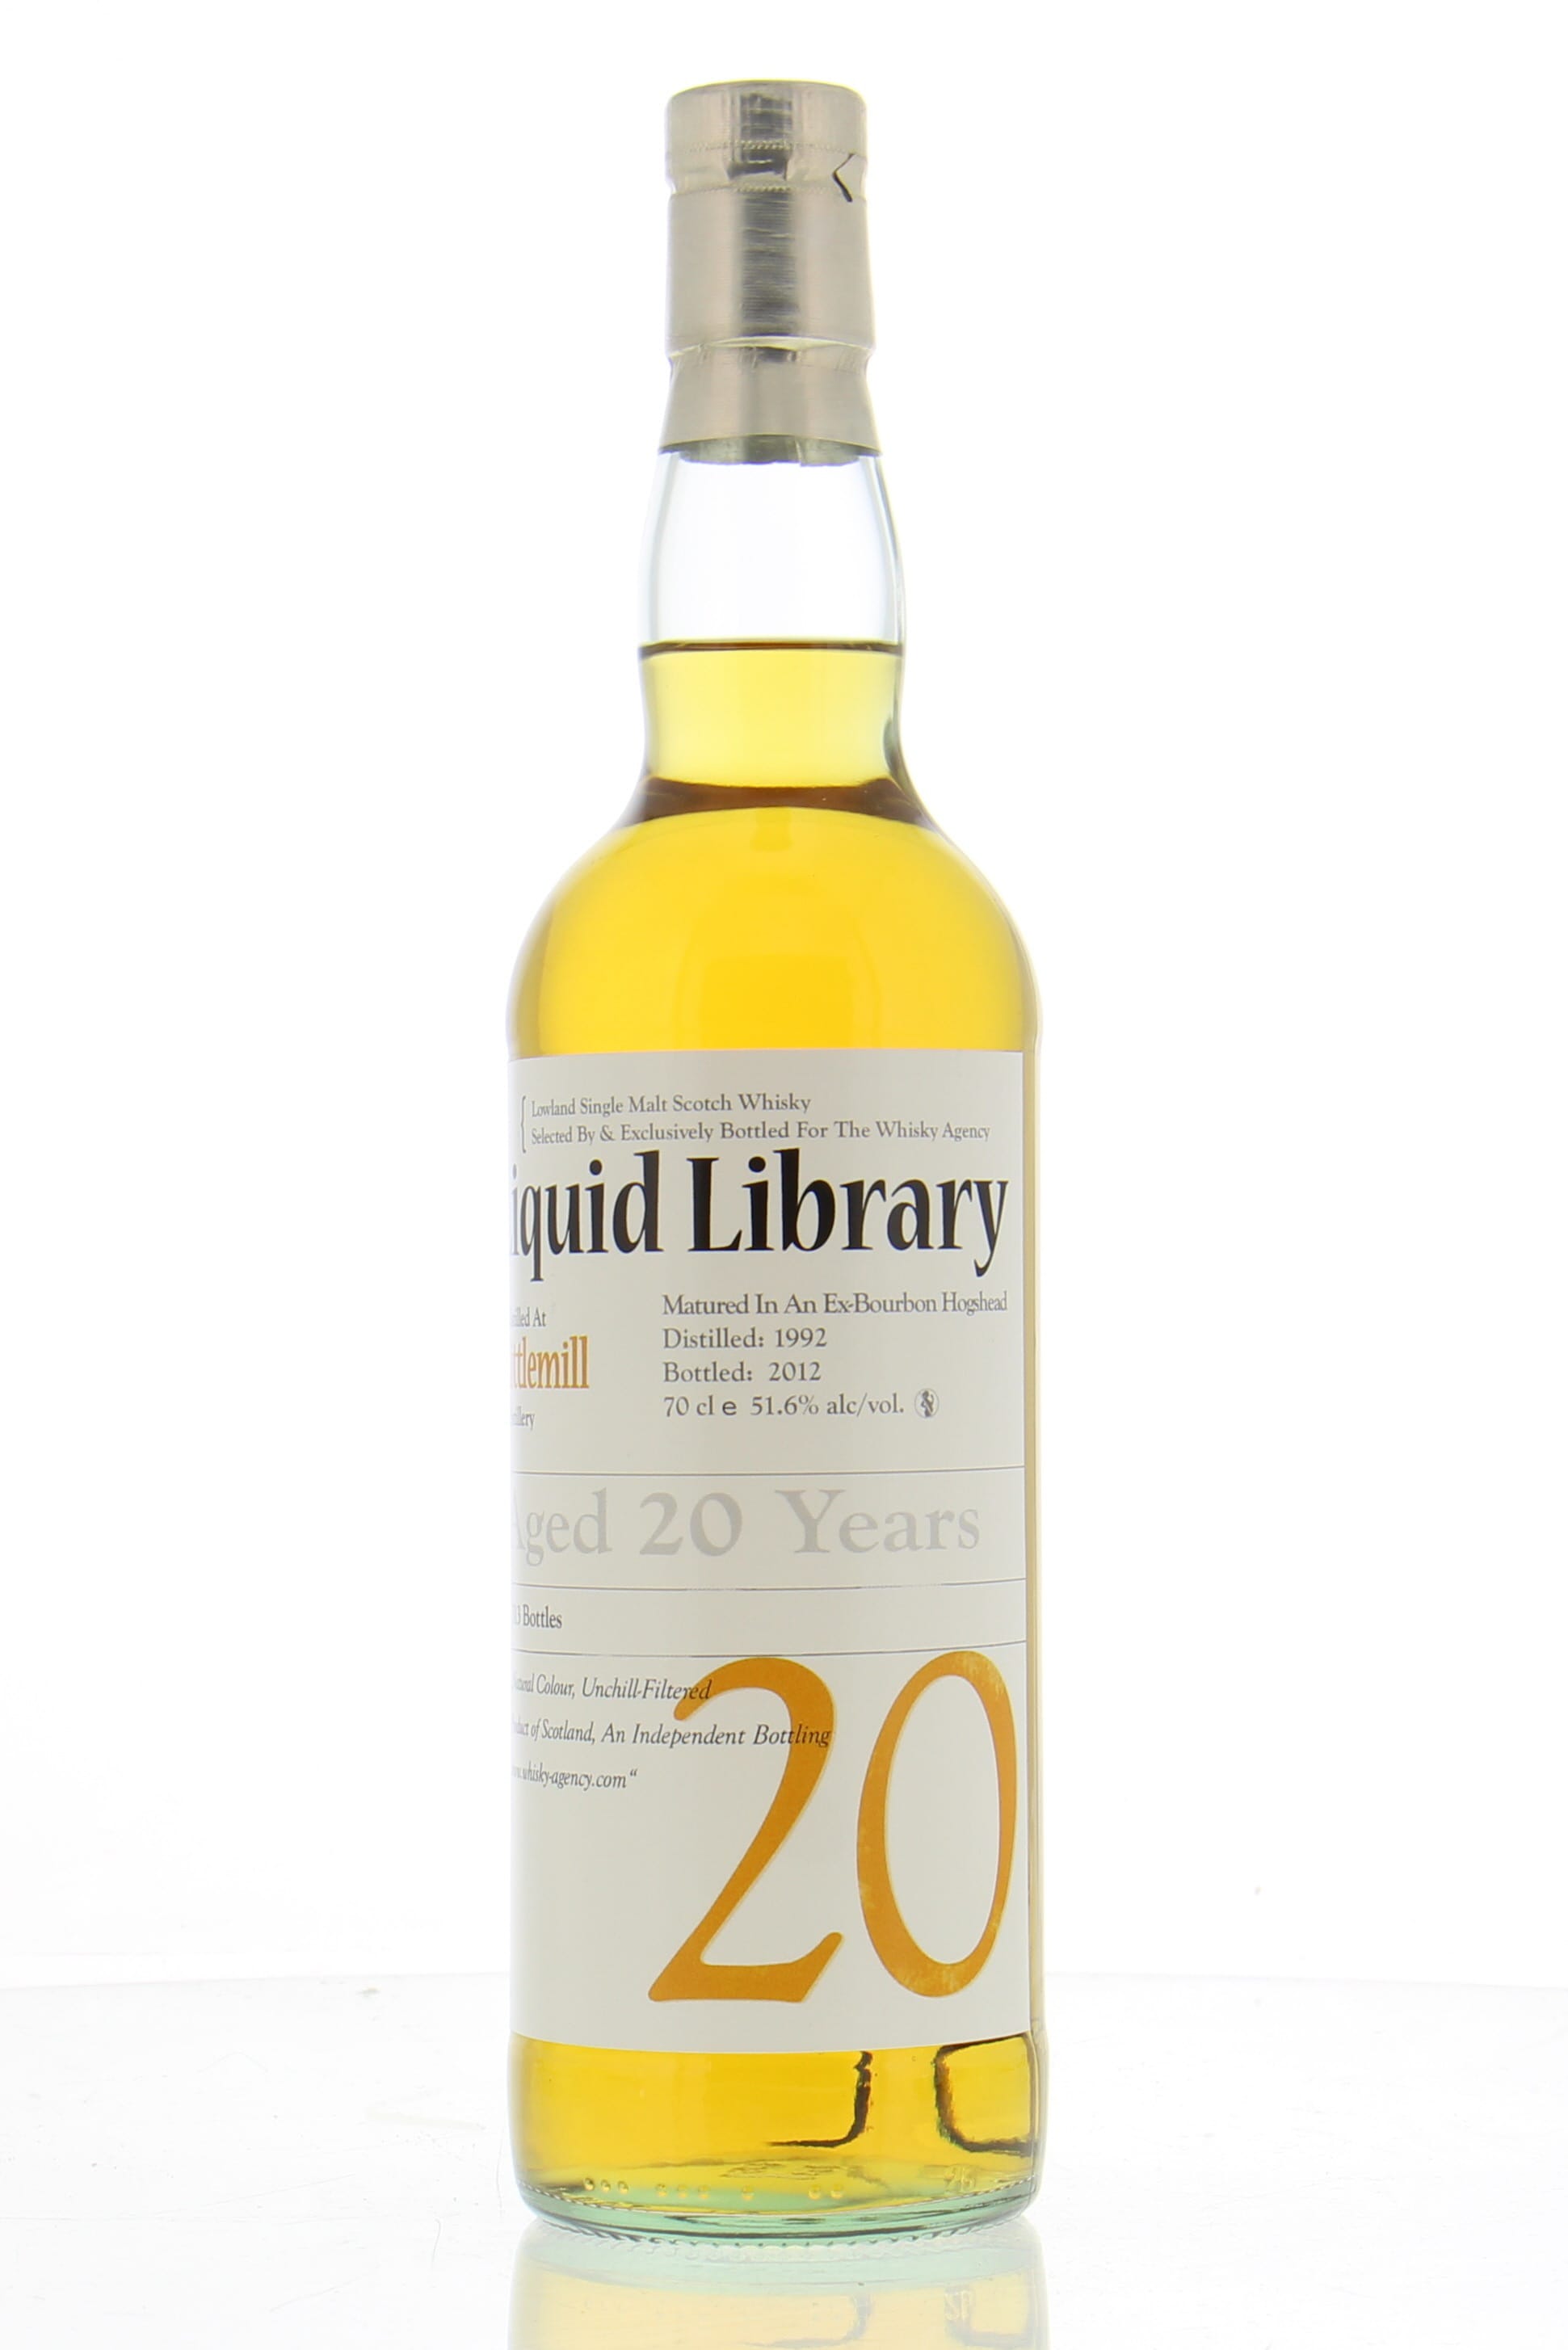 Littlemill - 20 Years Old The Whisky Agency Liquid Library 51.6% 1992